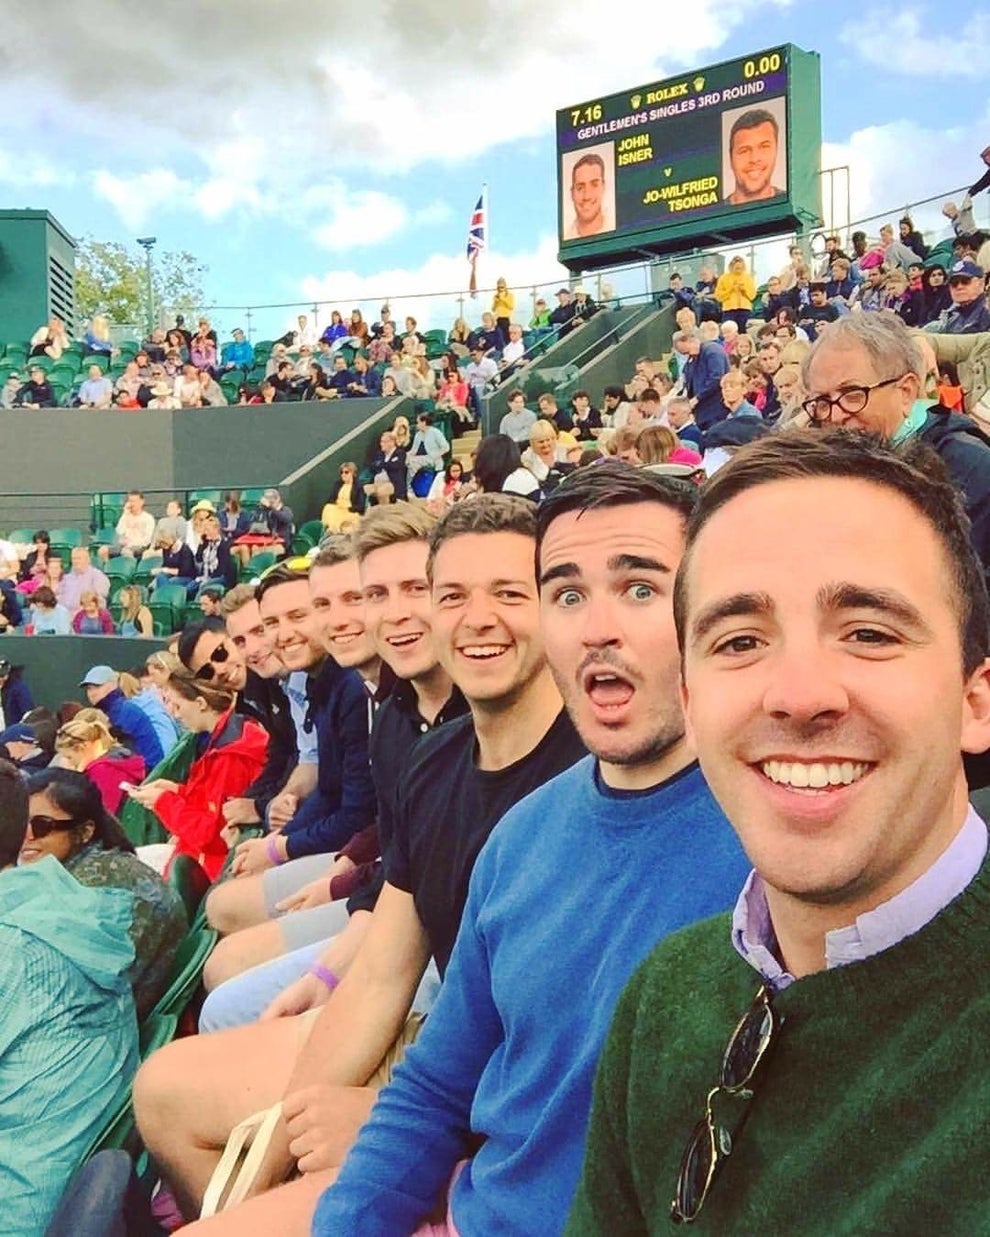 A popular meme showing a group of near-identical looking white men at a ballgame.